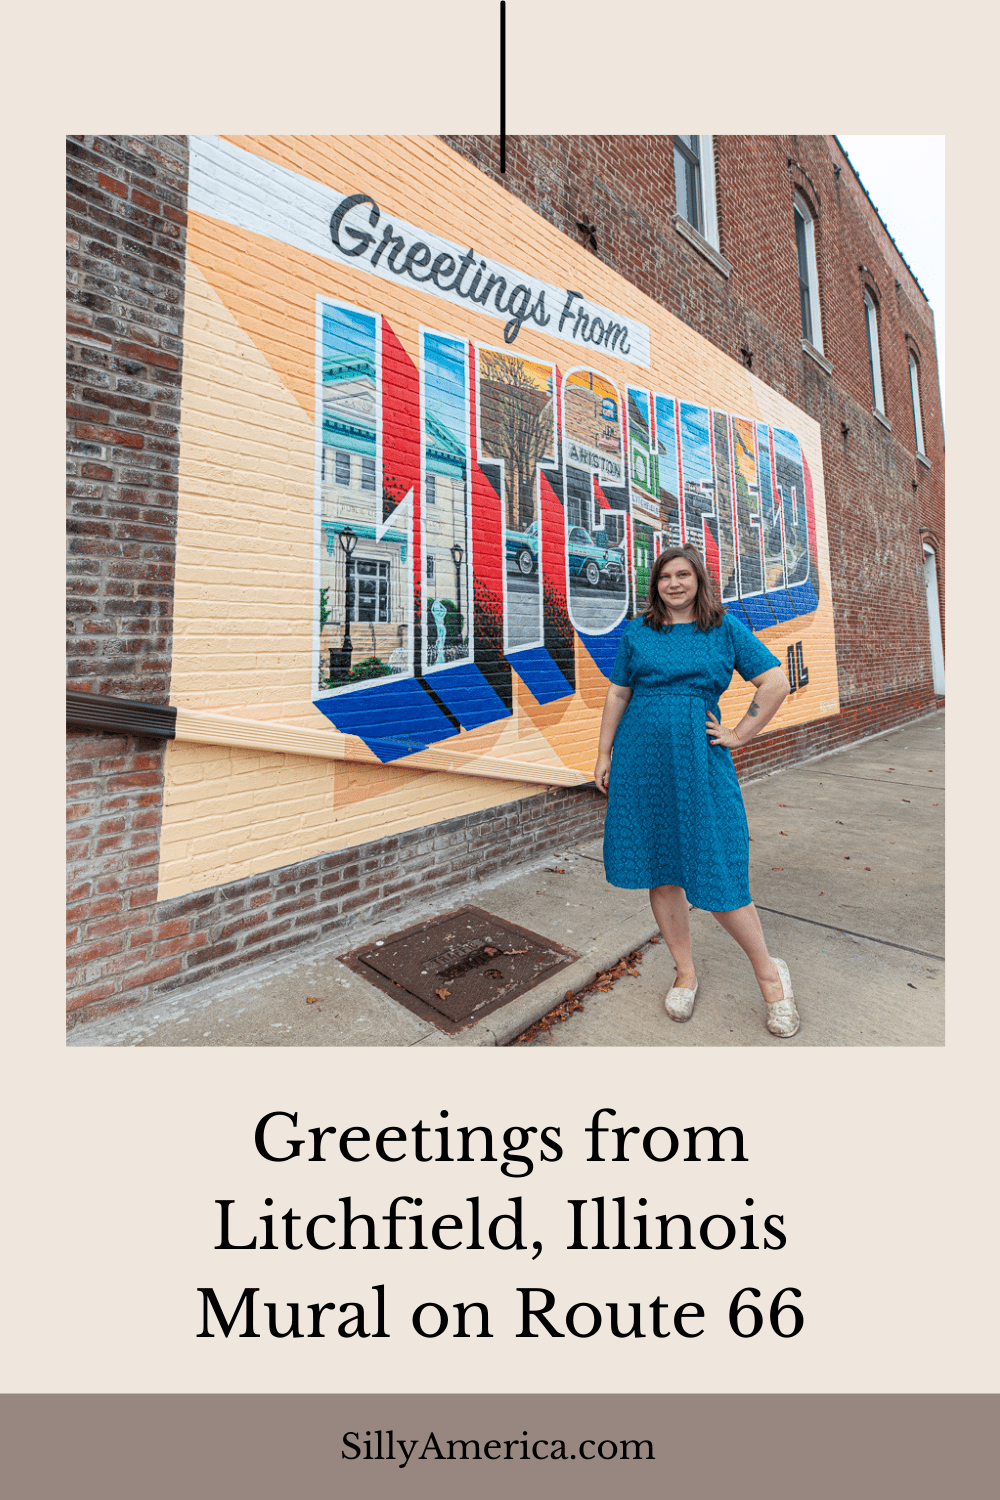 Greetings from Litchfield, Illinois! Visit the Greetings from Litchfield, Illinois postcard-style mural on your Route 66 road trip. Visit this Greetings Tour mural on an Illinois vacation - add the roadside attraction to your travel itinerary!  #RoadTrips #RoadTripStop #Route66 #Route66RoadTrip #IllinoisRoute66 #Illinois #IllinoisRoadTrip #IllinoisRoadsideAttractions #RoadsideAttractions #RoadsideAttraction #RoadsideAmerica #RoadTrip